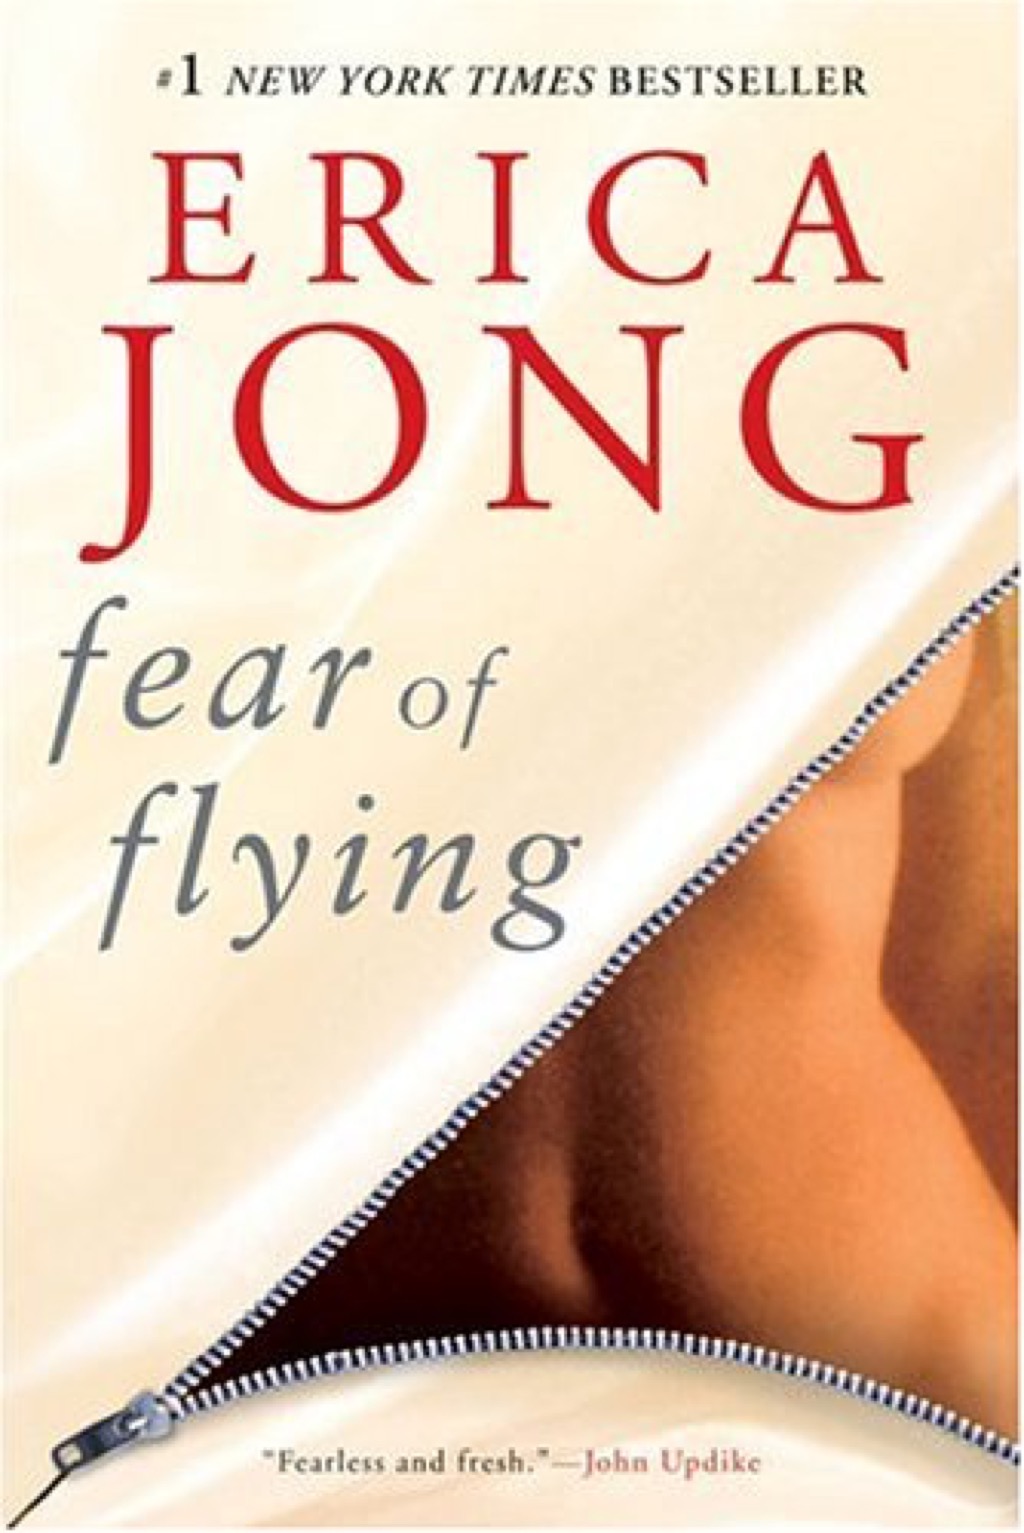 Fear of Flying books every woman should read in her 40s